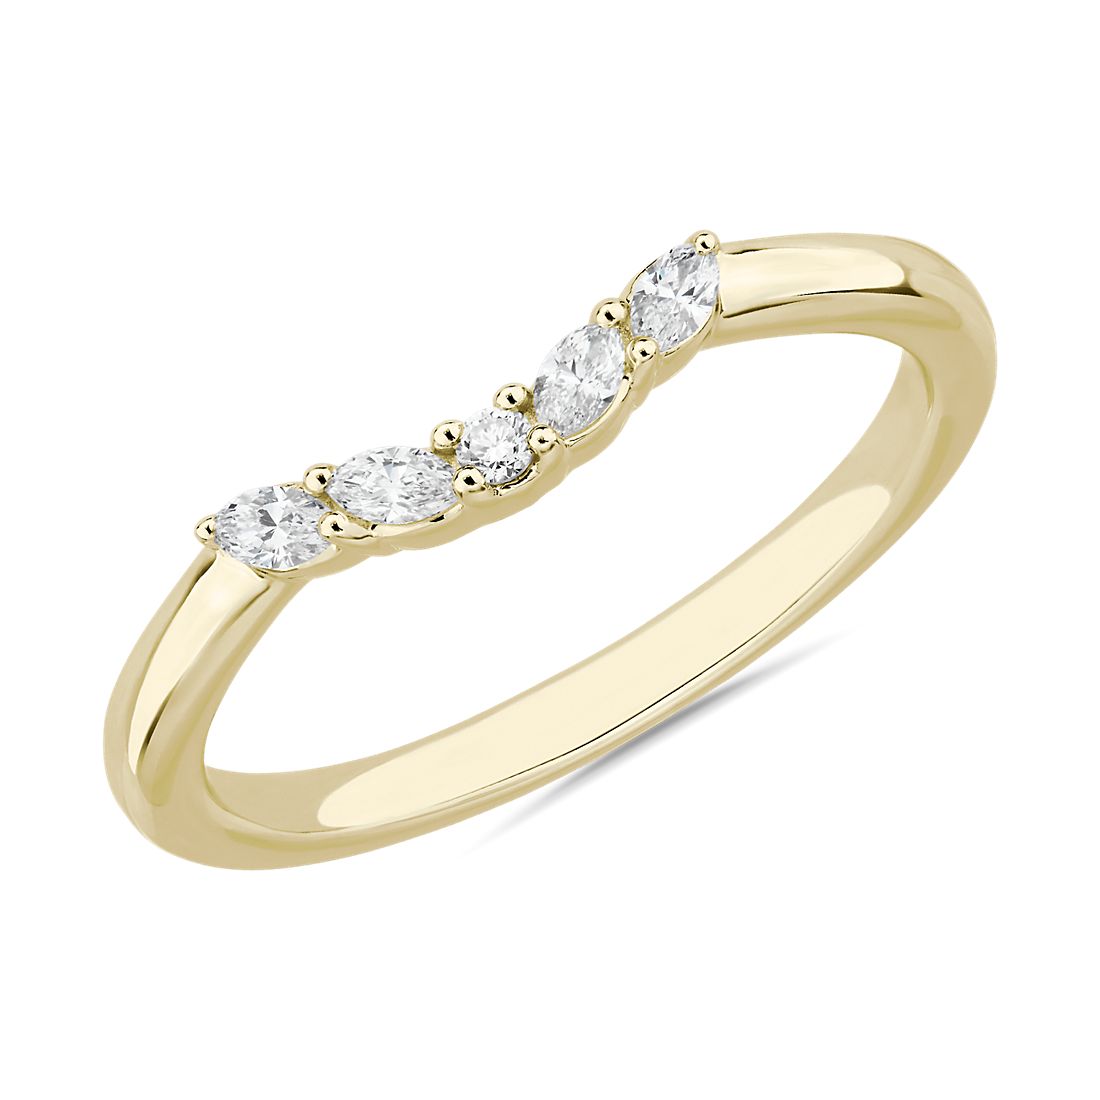 Curved Floral Marquise Diamond Ring in 14k Yellow Gold (0.12 ct. tw.)